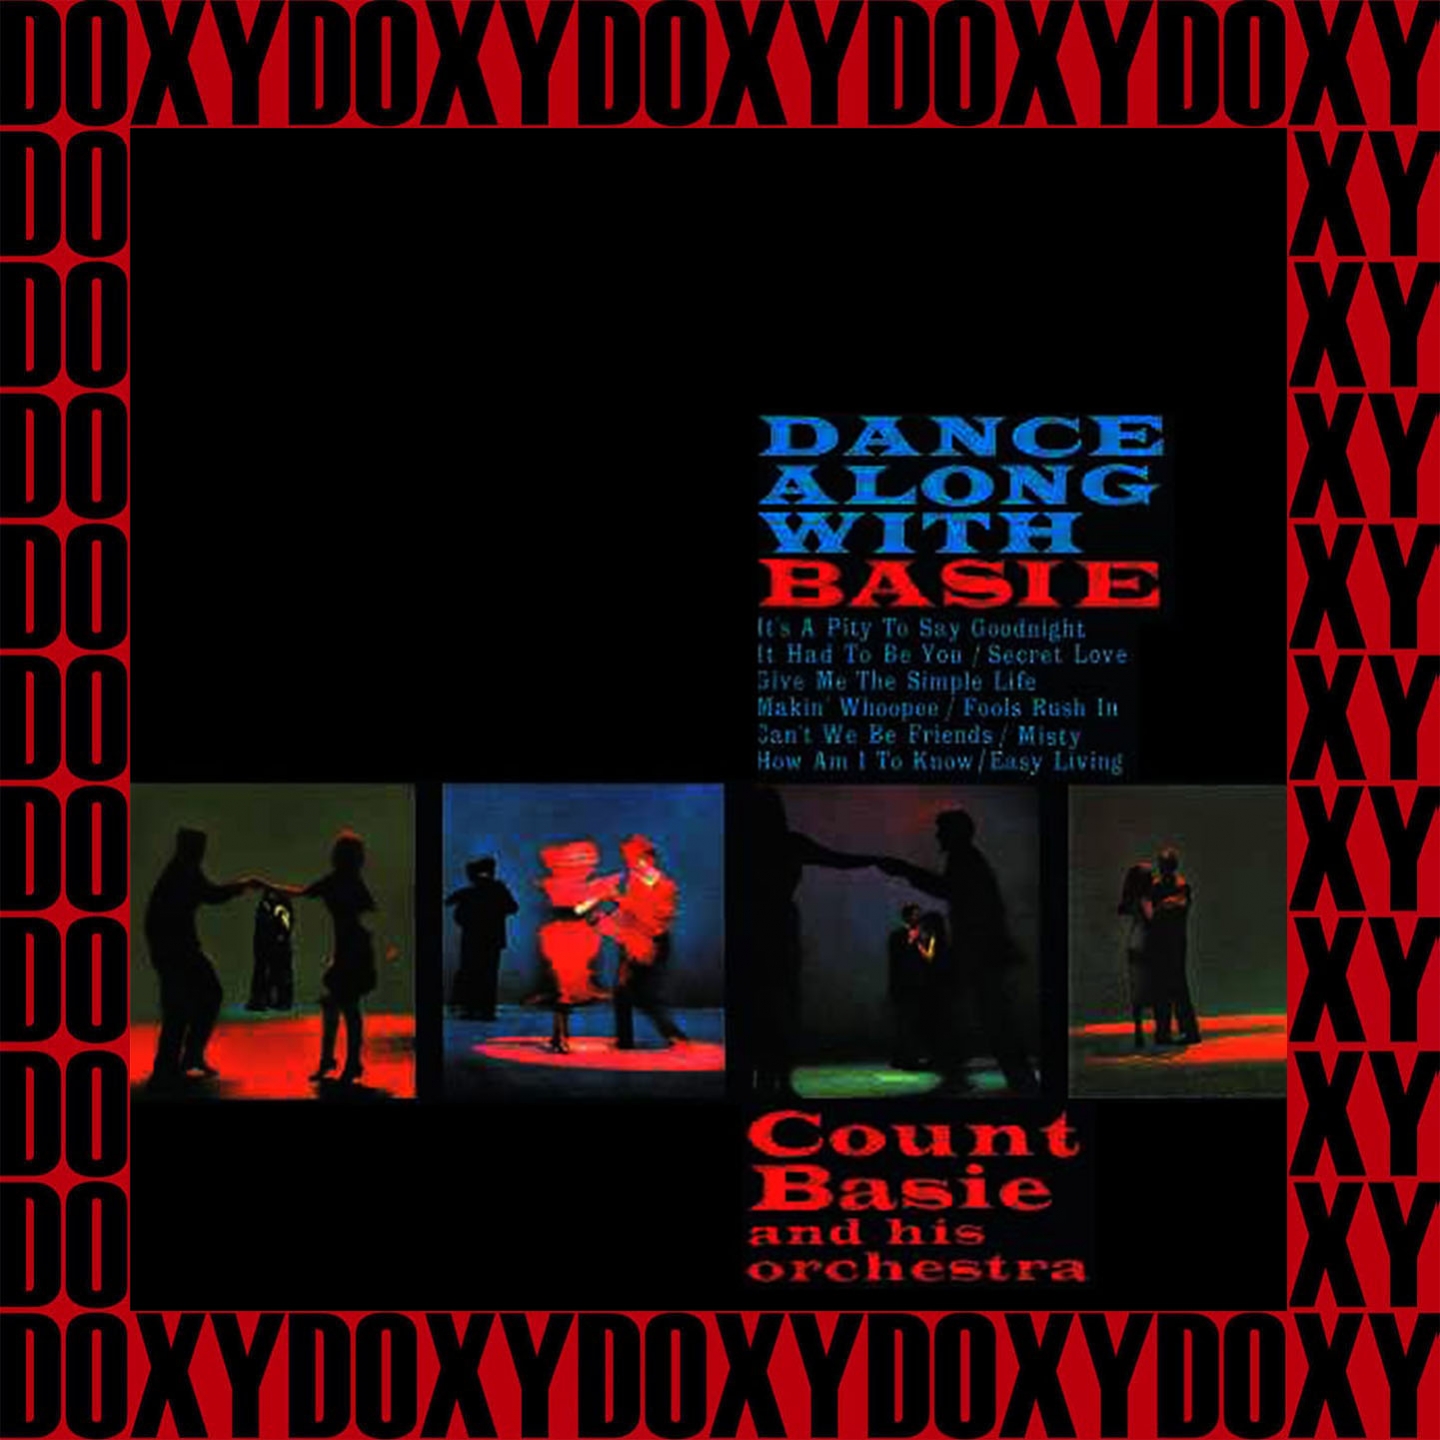 Dance Along with Basie (Remastered Version) (Doxy Collection)